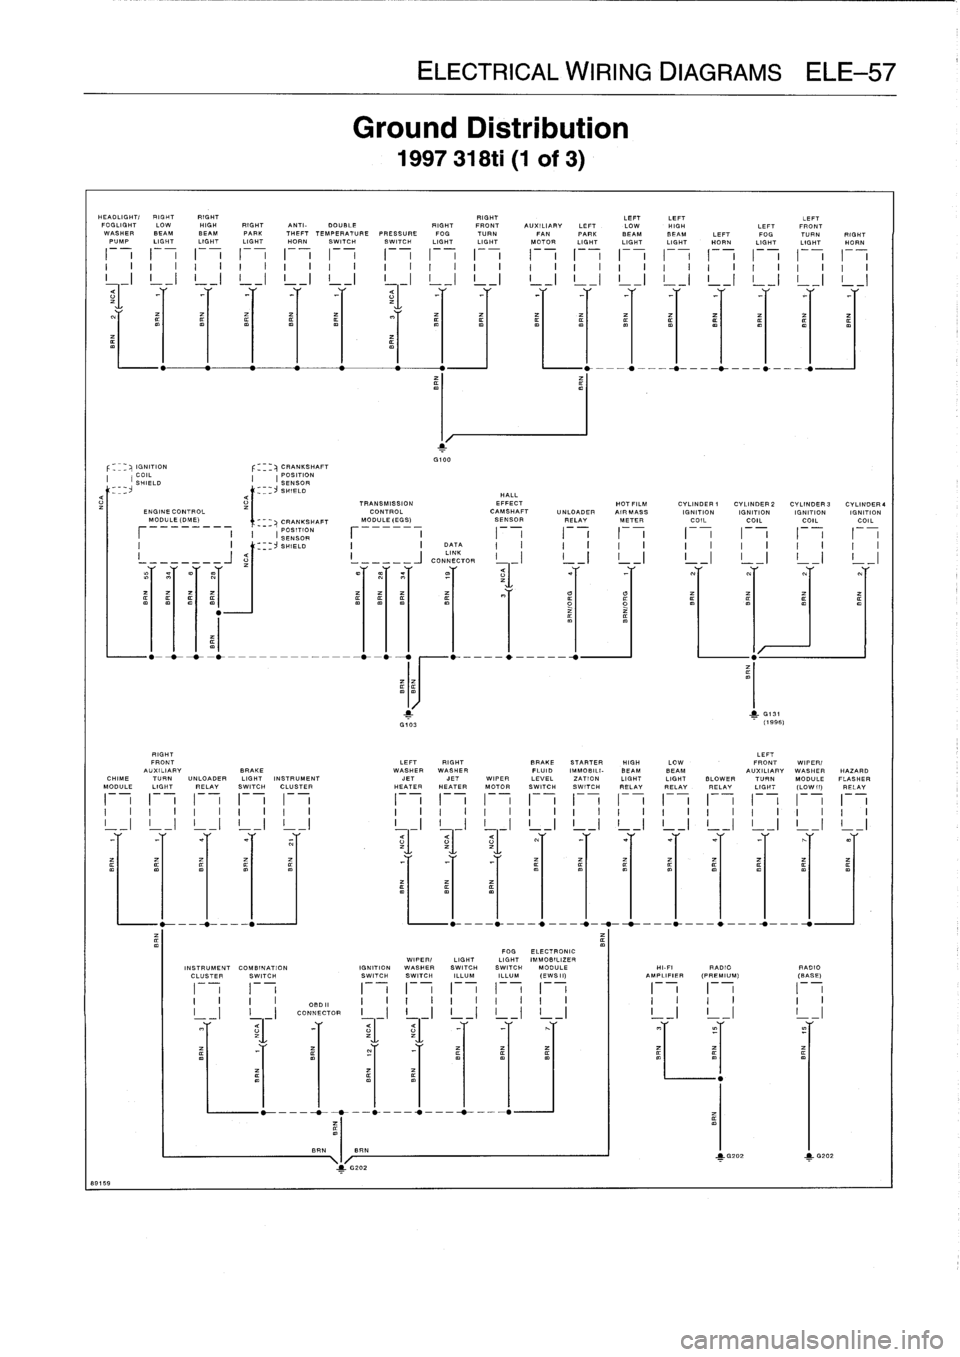 BMW 323i 1998 E36 Service Manual 
Ground
Distribution

1997
318ti
(1
of
3)

HEADLIGHT/RIGHTRIGHT

	

RIGHT

	

LEFTLEFT

	

LEFT

89159

FOGLIGHT
LOW
HIGH
RIGHT
ANTI-
DOUBLE

	

RIGHT
FRONT
AUXILIARY
LEFT
LOW
HIGH

	

LEFT
FRONT
WASH